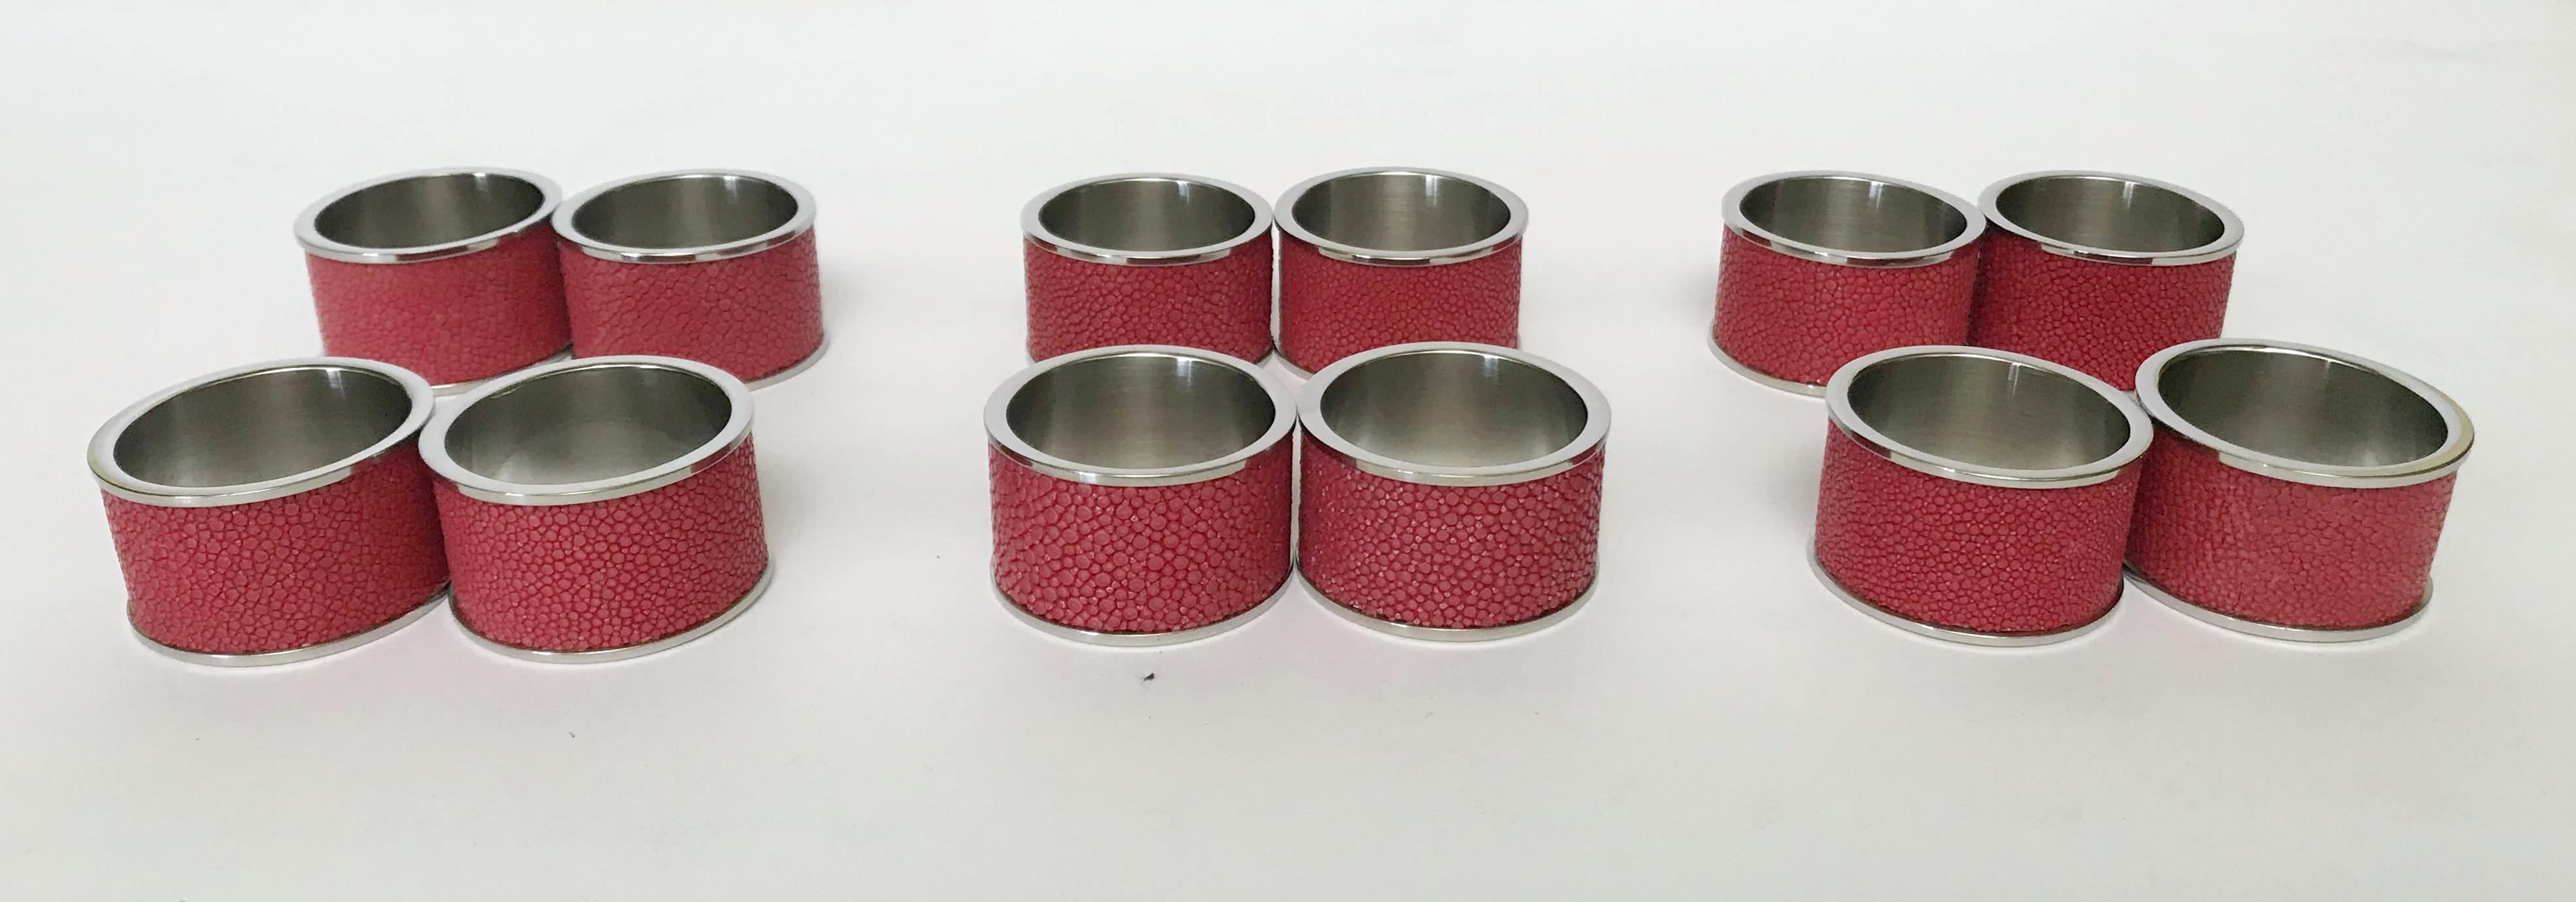 Italian red shagreen and stainless steel napkin rings with matching red leather boxes designed by Fabio Bergomi for Fabio Ltd / Made in Italy
Each ring has diameter 1.5 inches and width 1 inch
LAST SET OF 12 RINGS (2 per box) in stock in Los